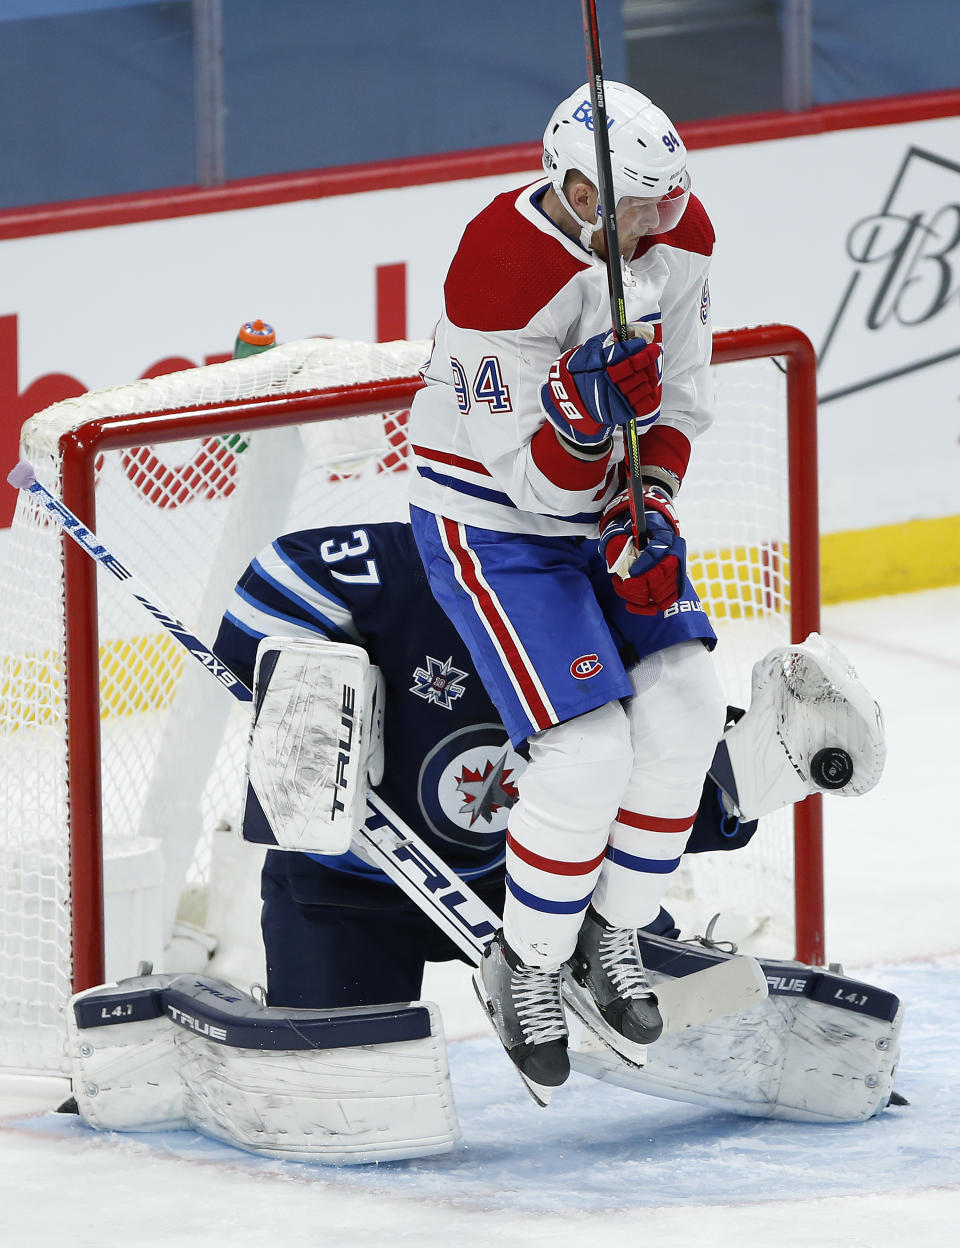 Winnipeg Jets goaltender Connor Hellebuyck (37) makes a save as Montreal Canadiens' Corey Perry (94) screens him during the second period of an NHL hockey game Saturday, Feb. 27, 2021, in Winnipeg, Manitoba. (John Woods/The Canadian Press via AP)